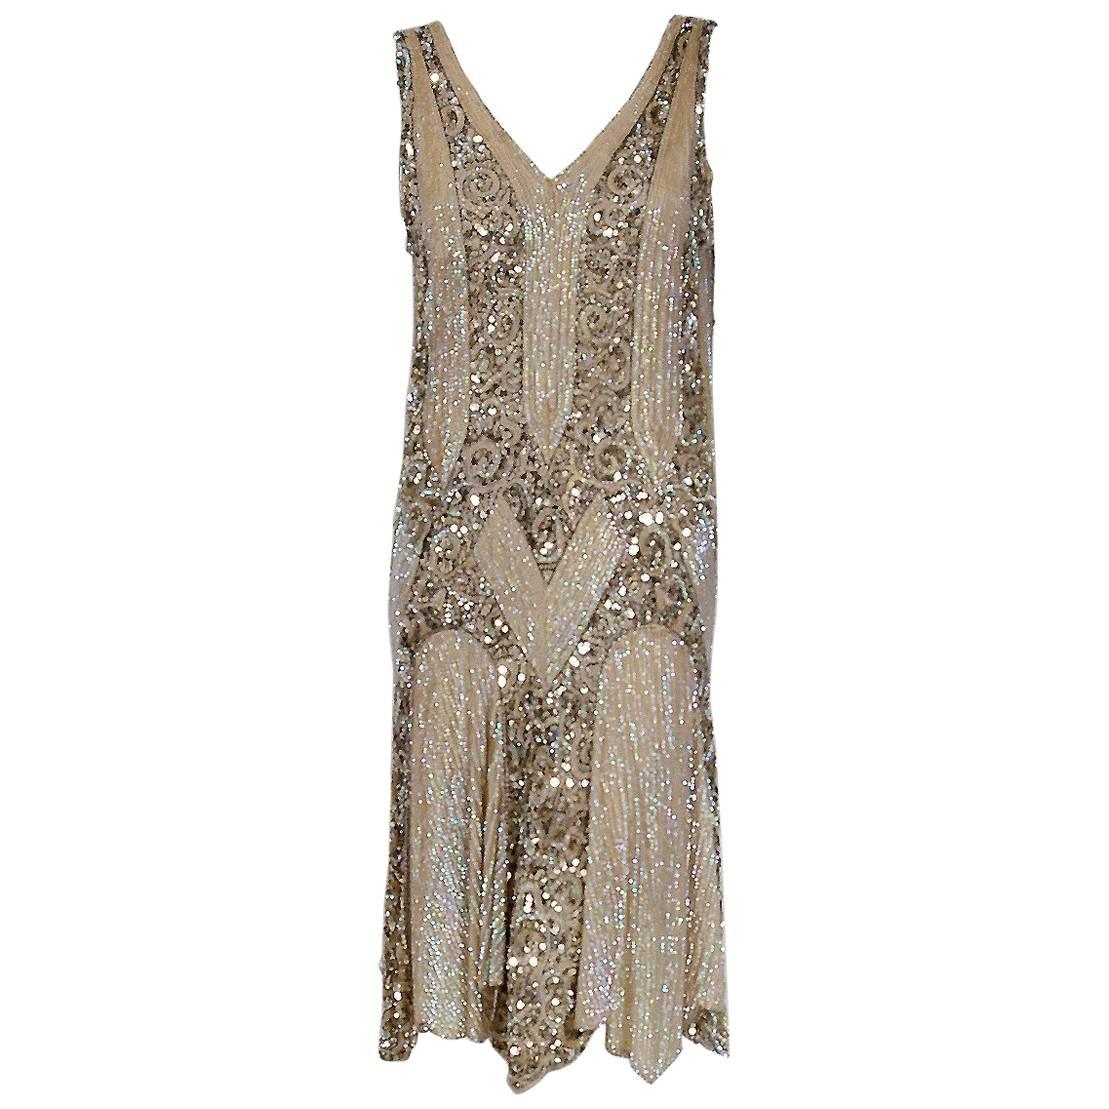 1920's French Couture Champagne Golden Beaded Sequin Art Deco Flapper Dress